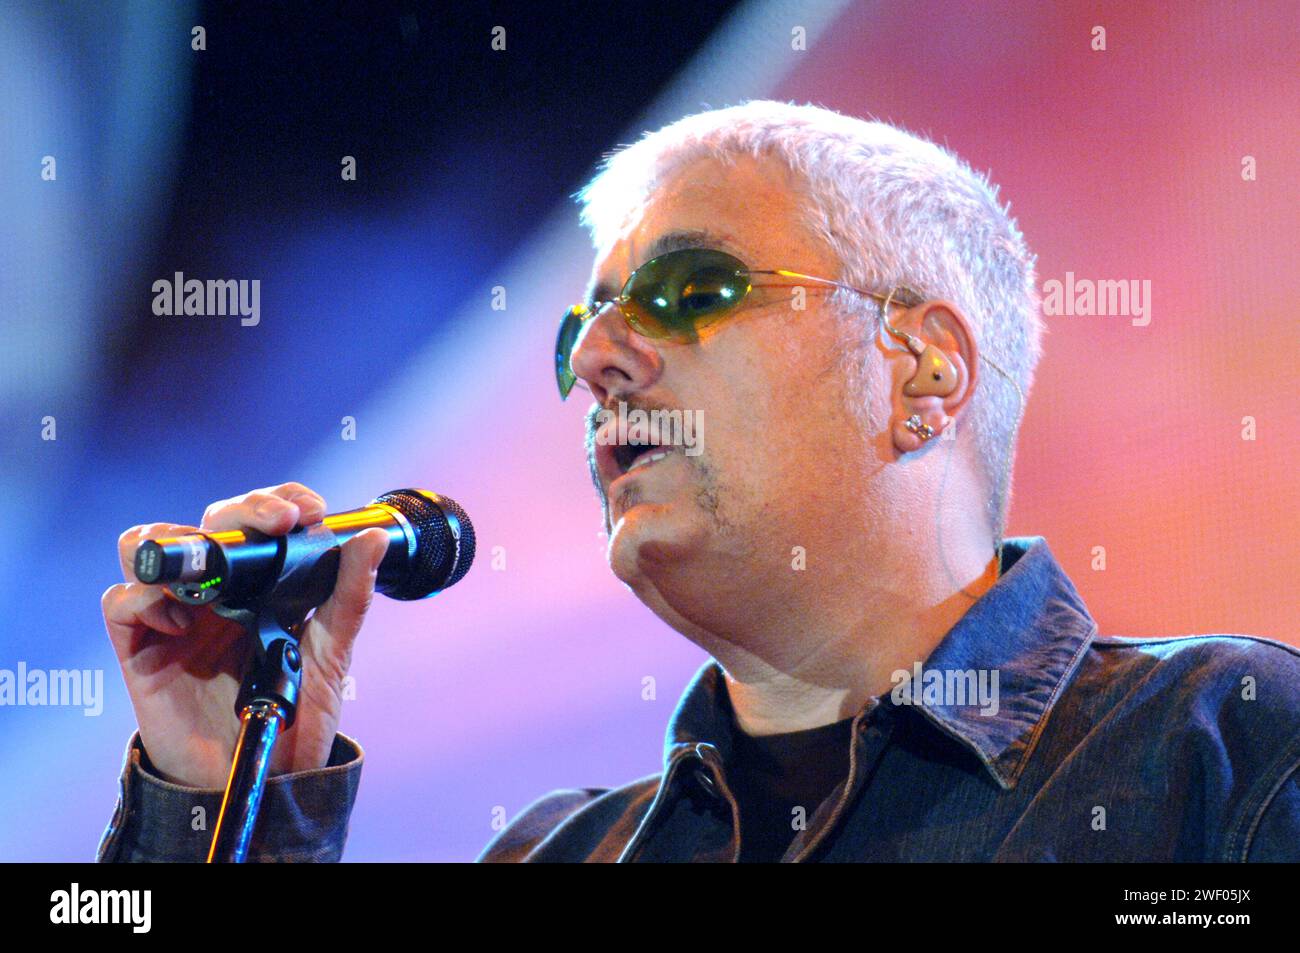 Napoli Italy 2006-06-01 : Pino Daniele in concert during the musical event "Festivalbar 2007" Stock Photo